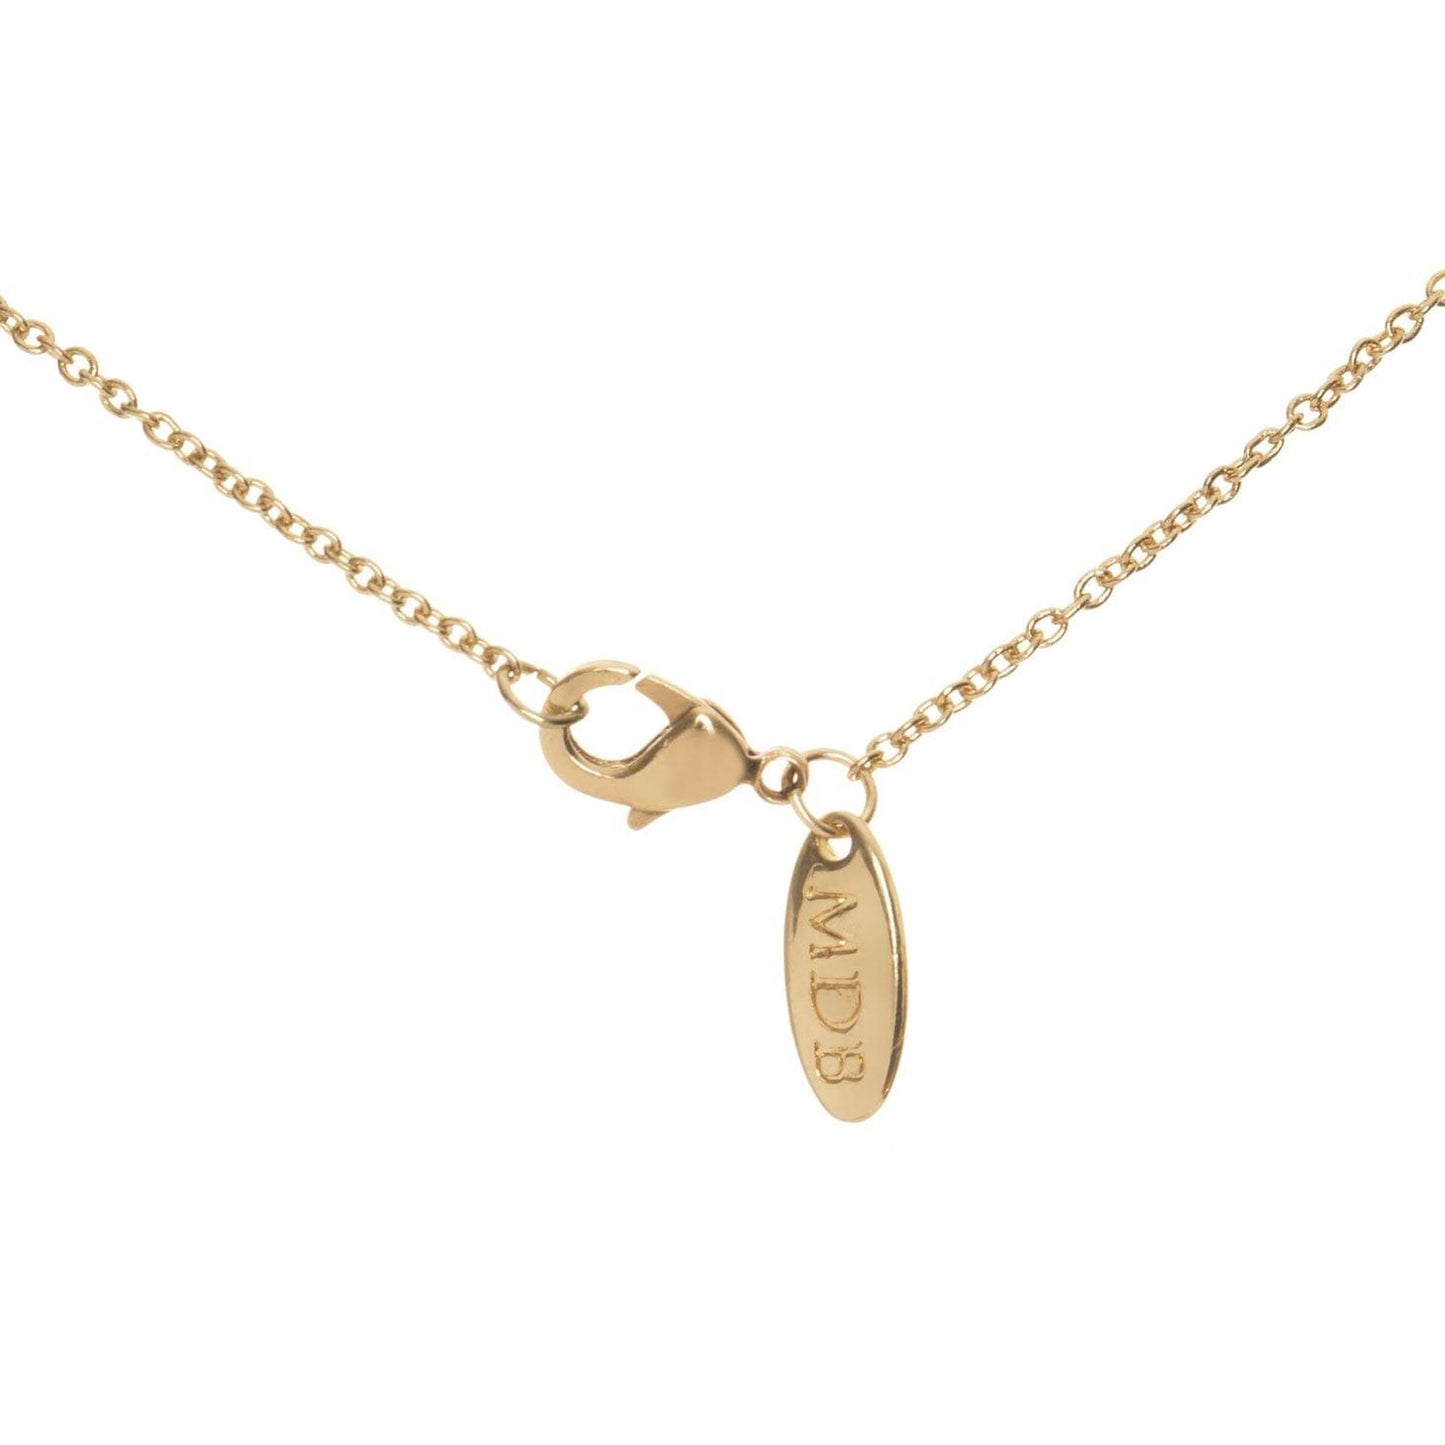 Lumiela Personalized Nameplate Ava Necklace in Gold Tone